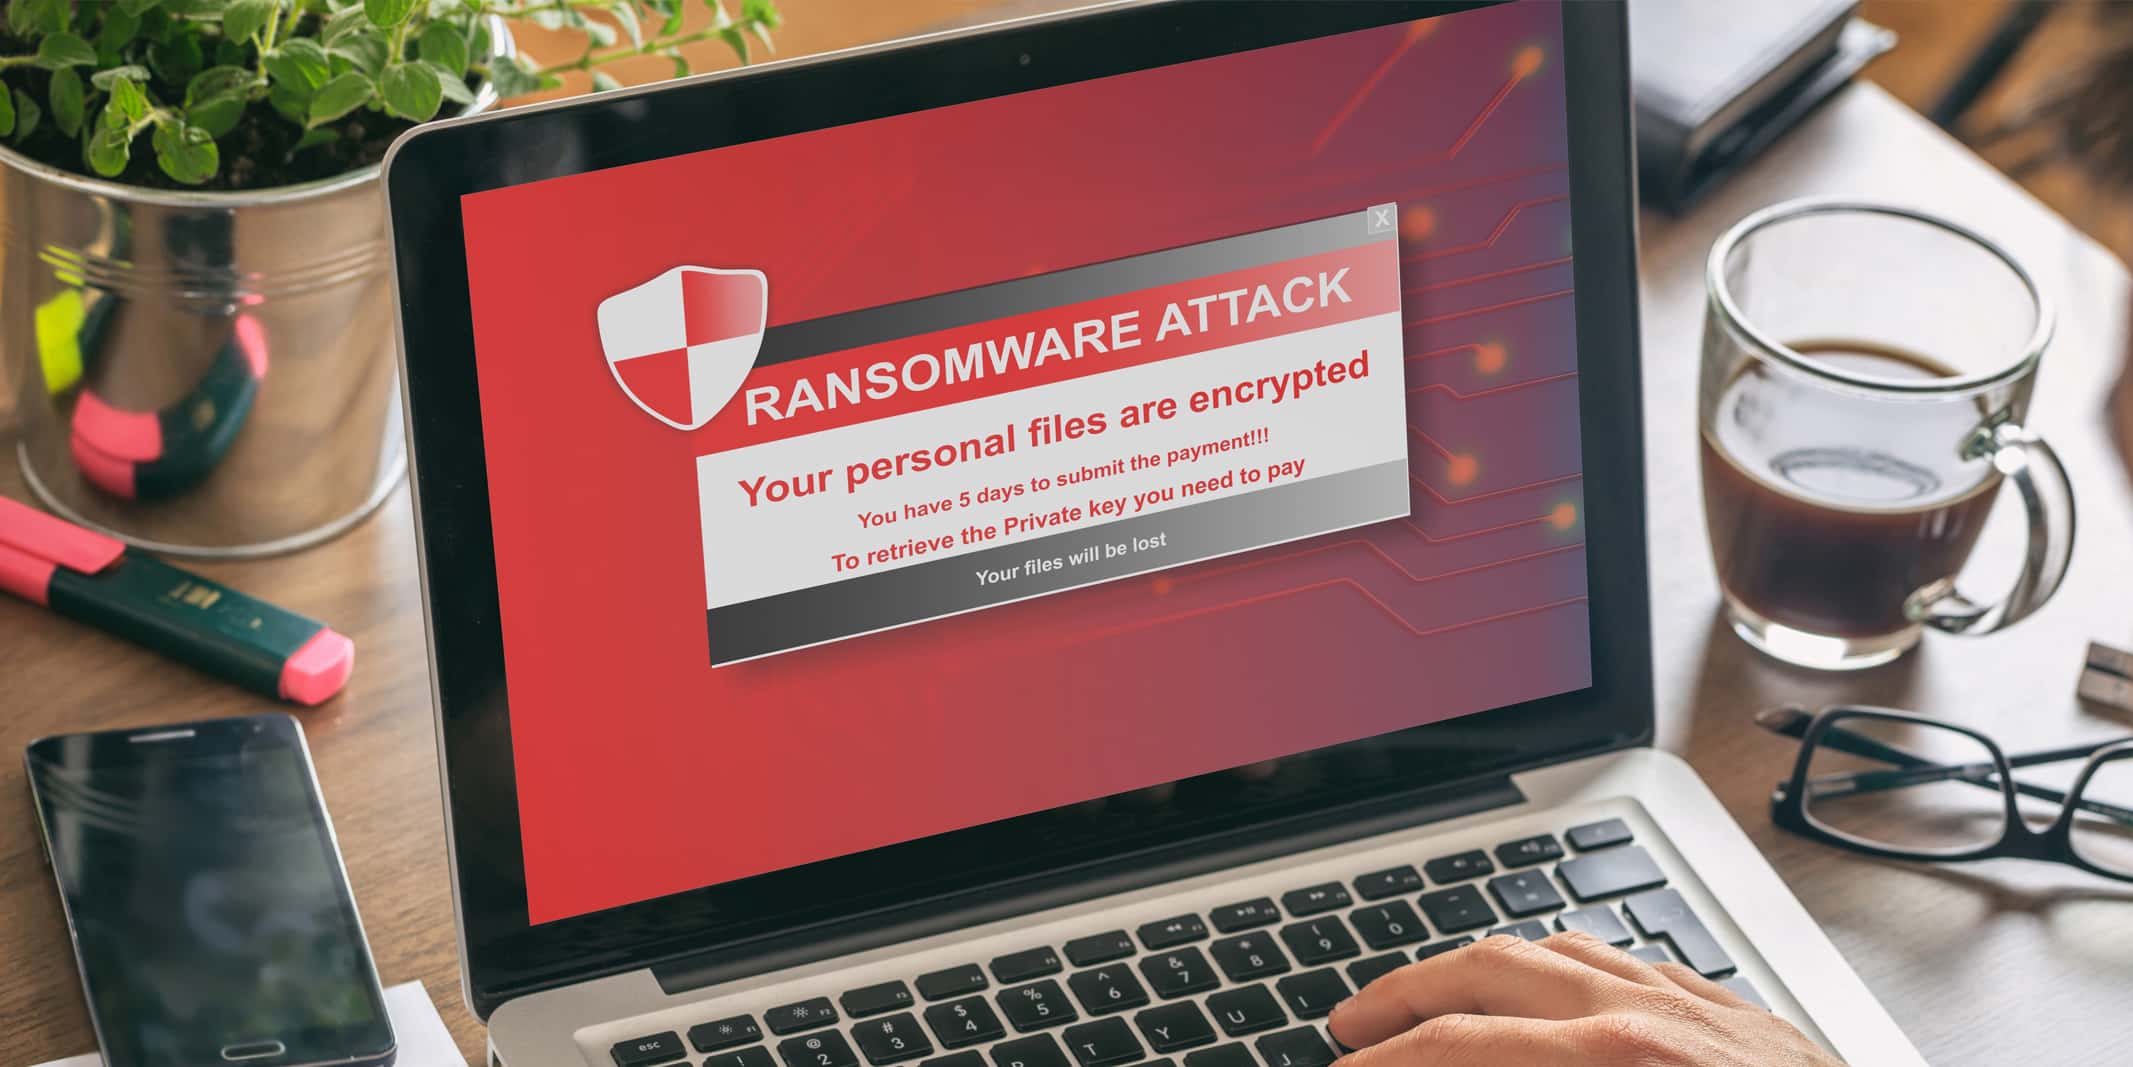 ransomware attack popup screen on laptop